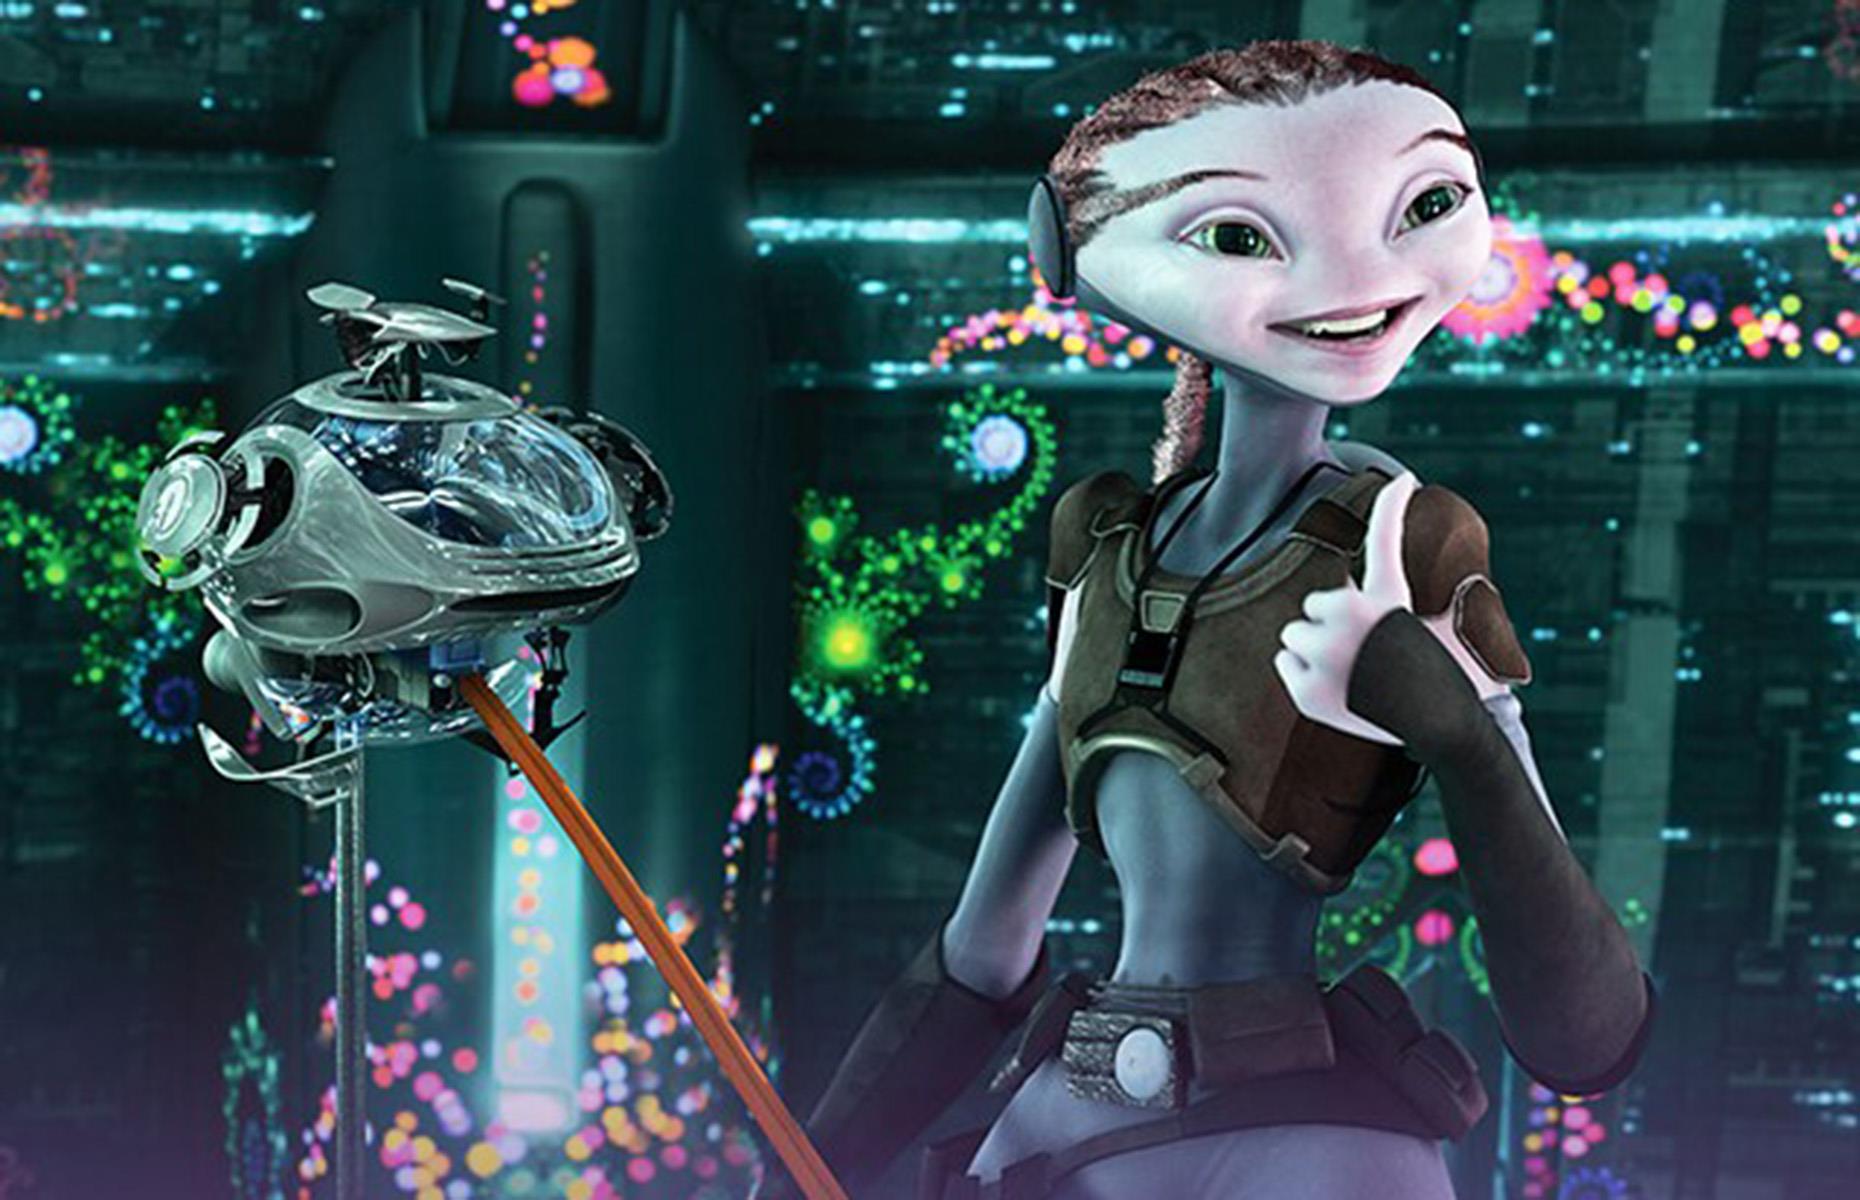 <p>Disney released alien sci-fi film <em>Mars Needs Moms</em> in 2011, splashing out a hefty $150 million on its production.</p>  <p>However, on its release the film received a slew of negative reviews, with criticism focusing on everything from the poor script to the creepy animation style. As a result, it earned a pitiful $39 million globally, resulting in a loss of $110 million – and that's before distribution and marketing are factored in. </p>  <p>Sources can’t agree on just how much money this particular box office disaster lost Disney, with estimates ranging from $143 million to a staggering $336 million. Ouch. </p>